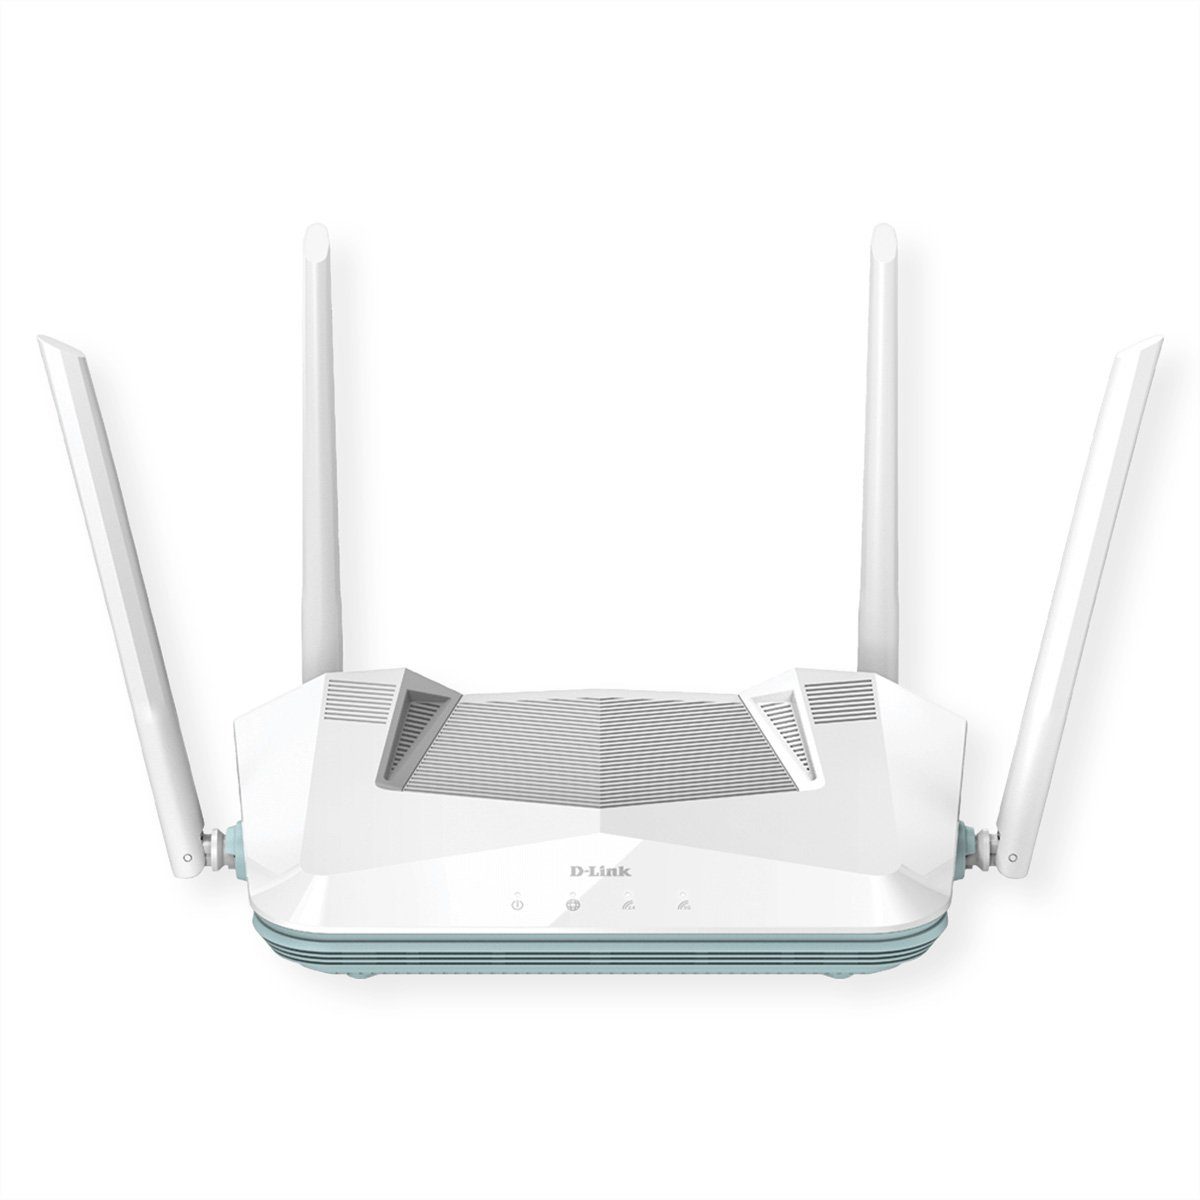 Smart 6, EaglePro WiFi MU-MIMO AX3200, WLAN-Router, R32/E AI, Router D-Link